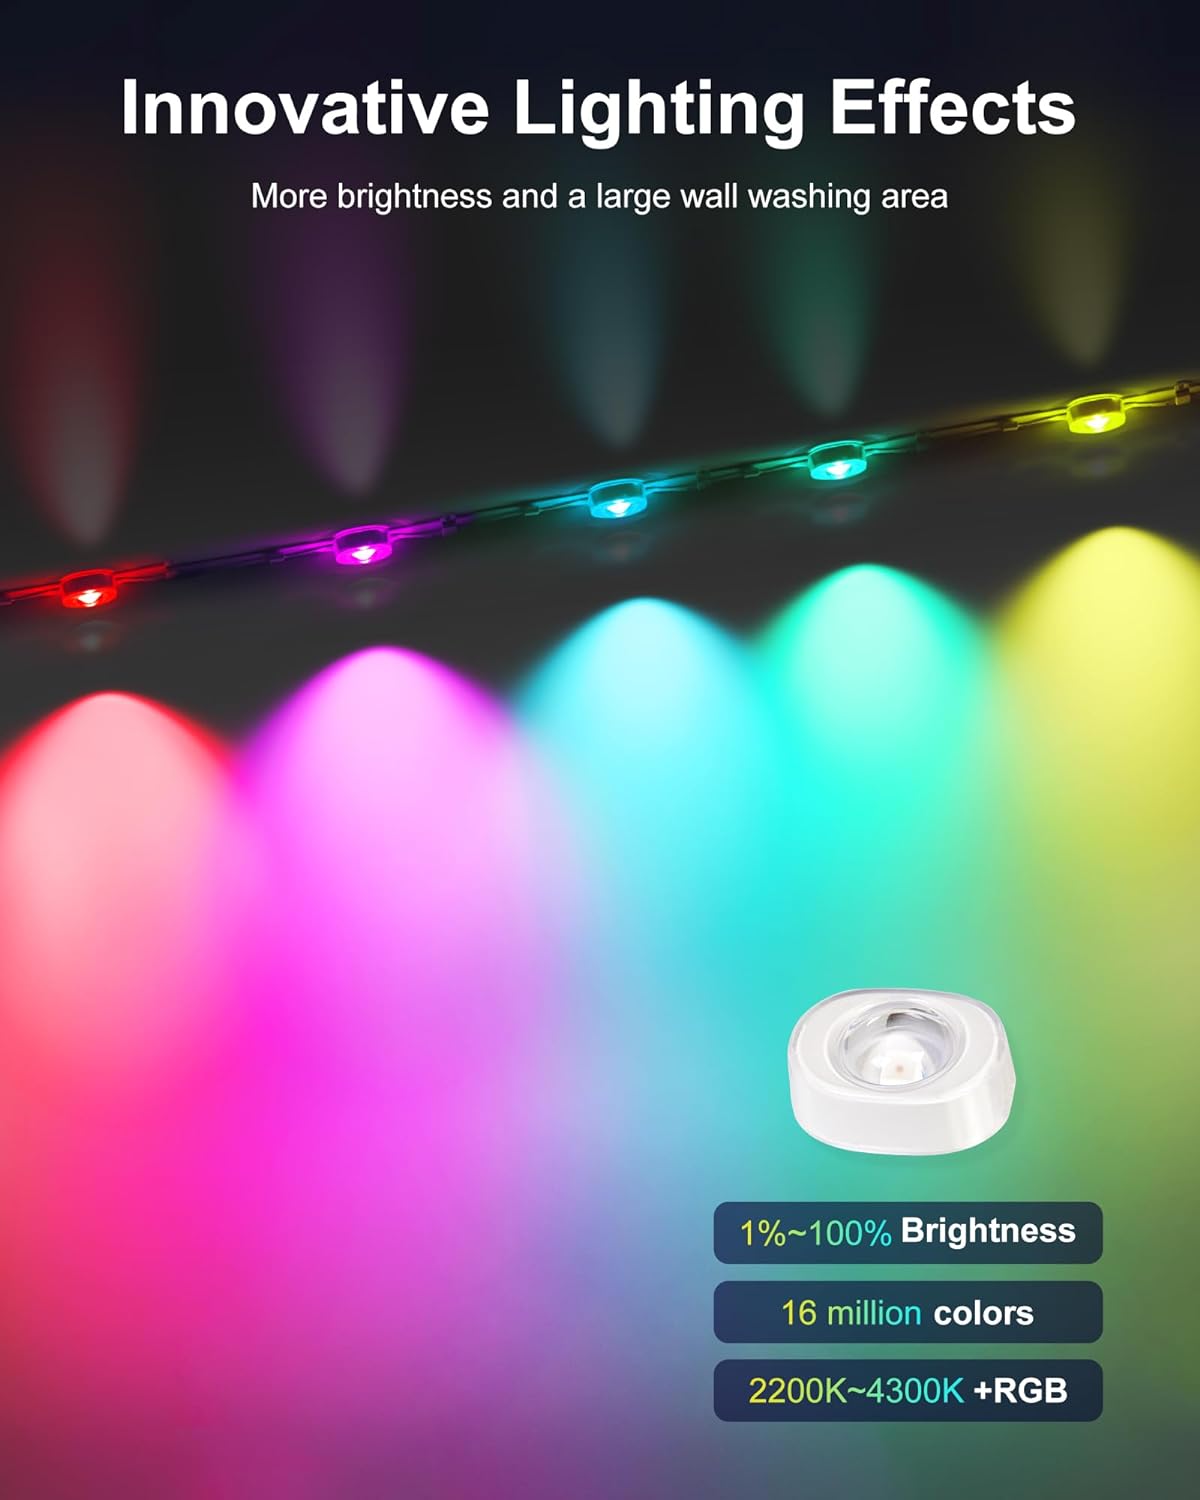 Permanent Outdoor Lights for House, 100ft Smart RGBIC Outside Lights with 72 Scene Modes, IP67 Waterproof Eaves Lights for Christmas All Holiday Decorations, Work with Alexa, Google Assistant (